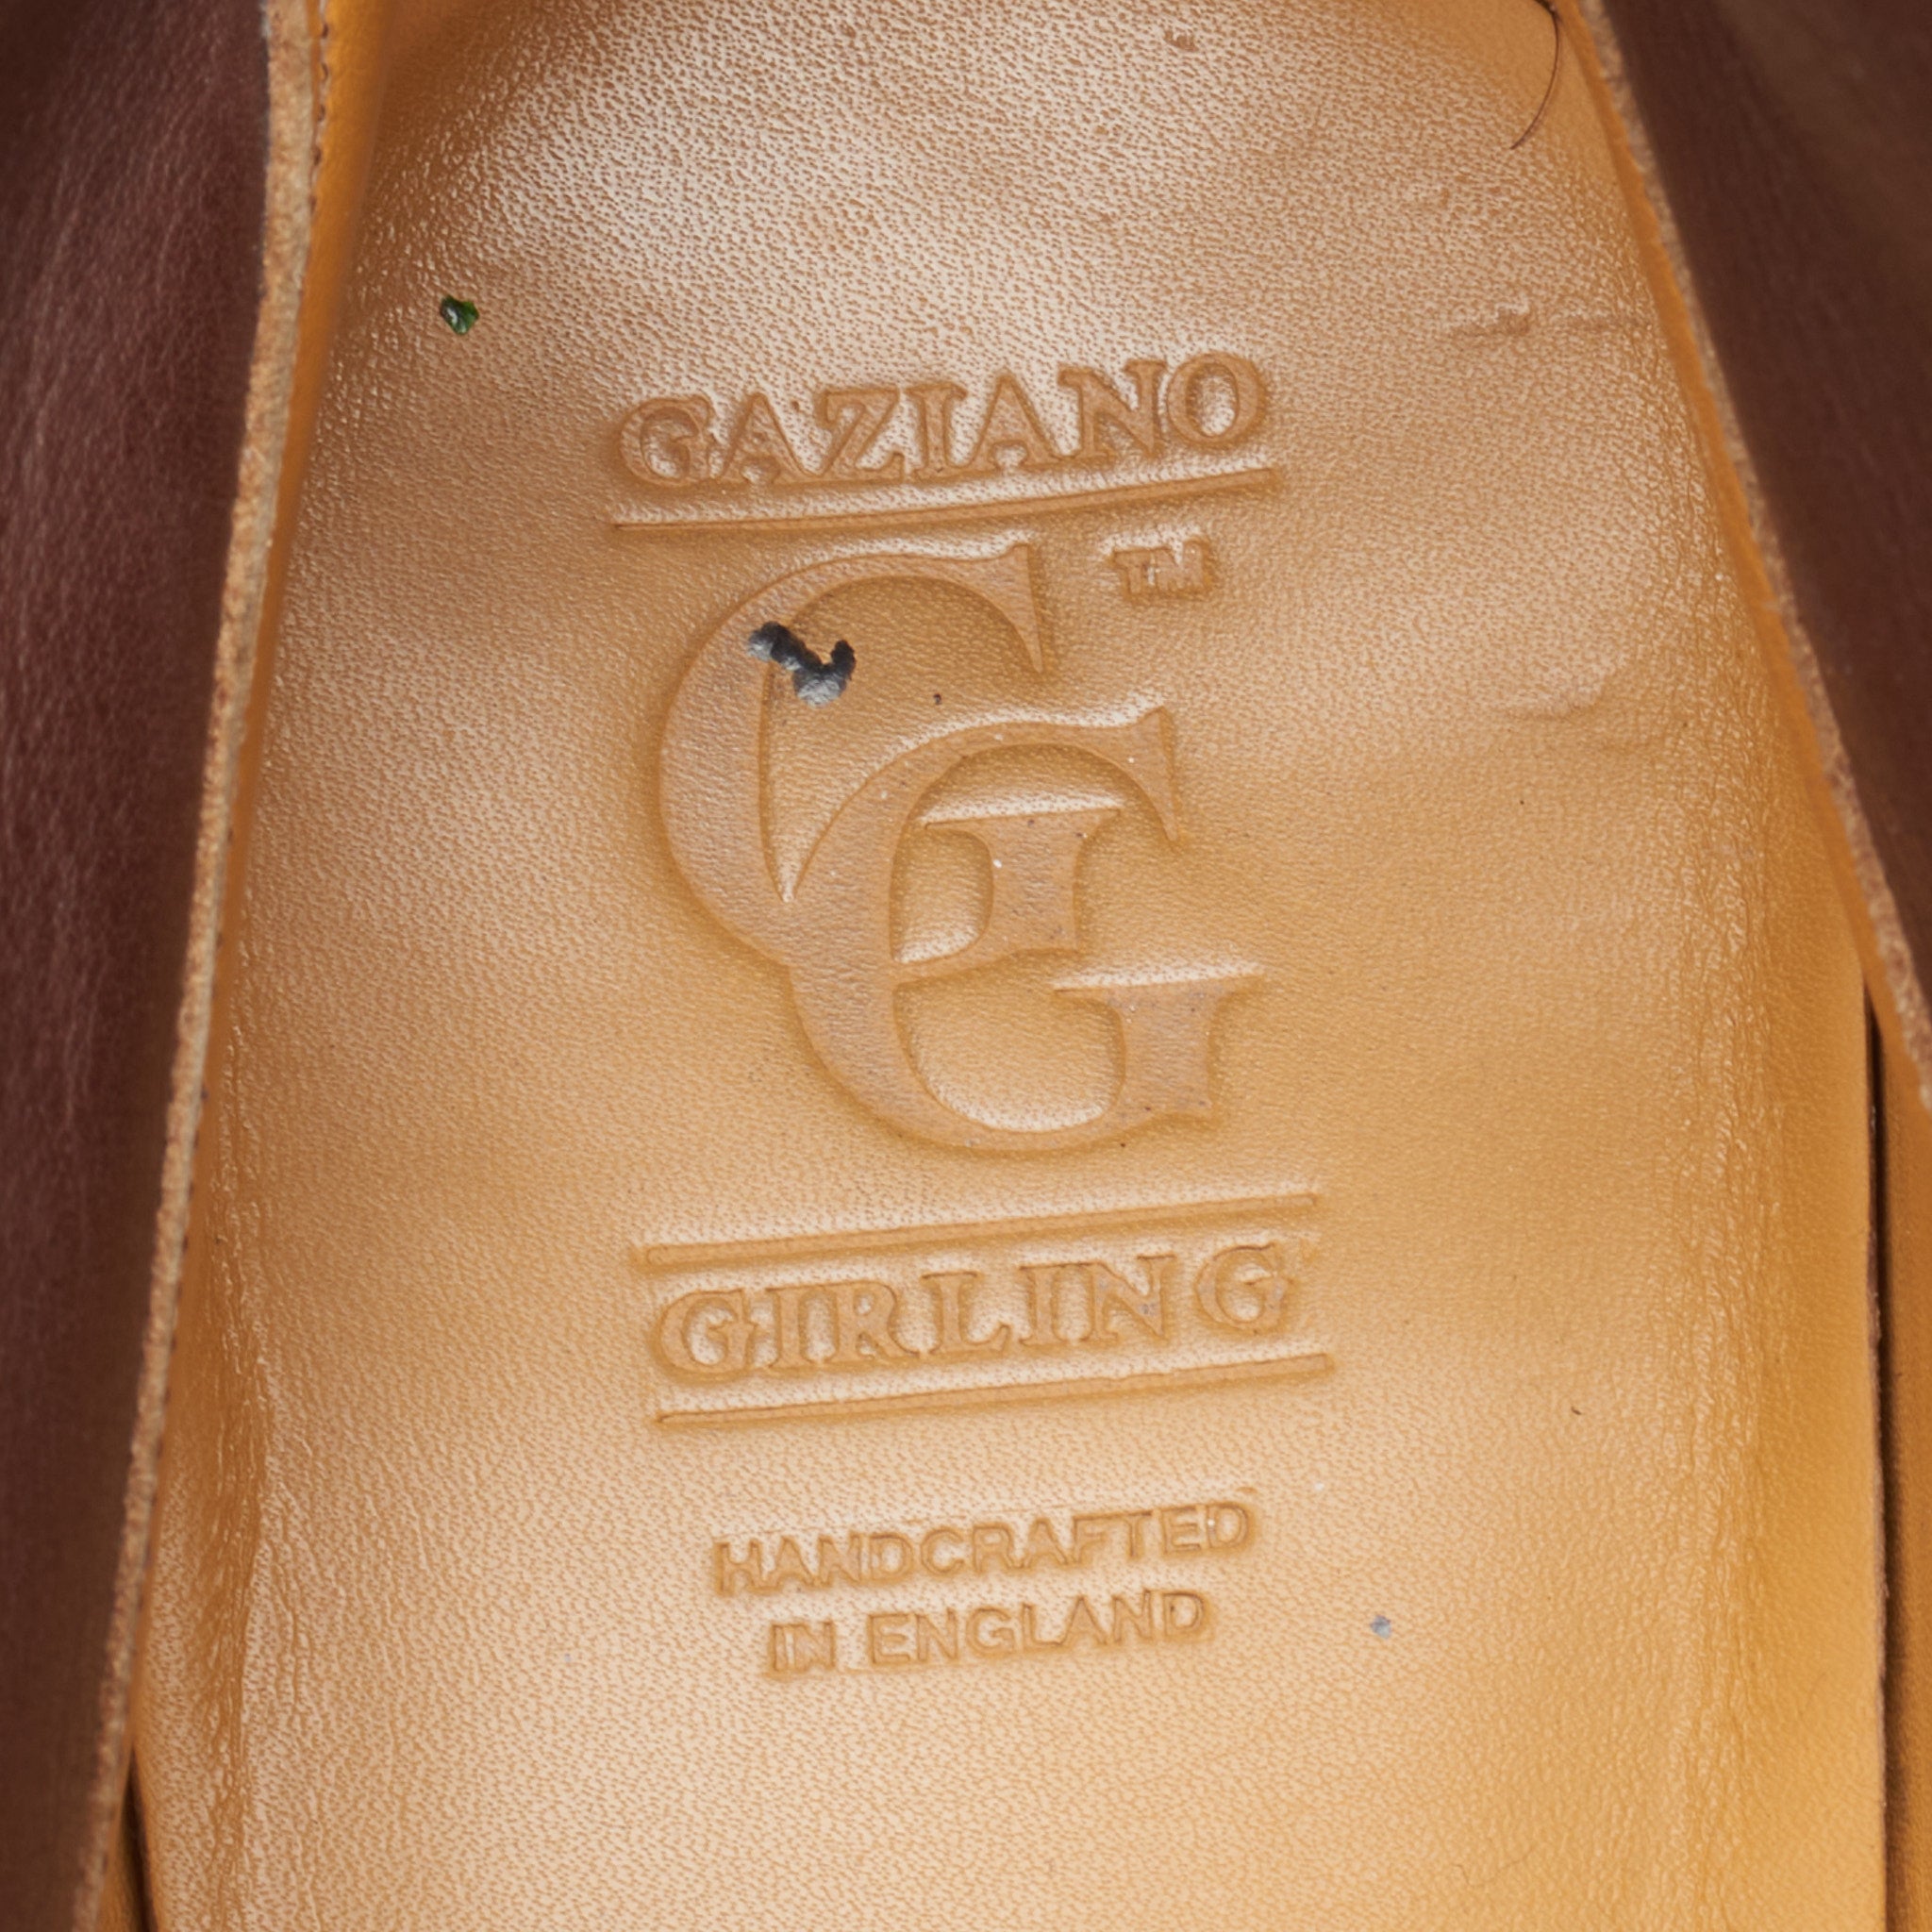 GAZIANO & GIRLING "Arran" Mink Suede Leather Chukka Boots 8E US 8.5 Last MH71 GAZIANO & GIRLING